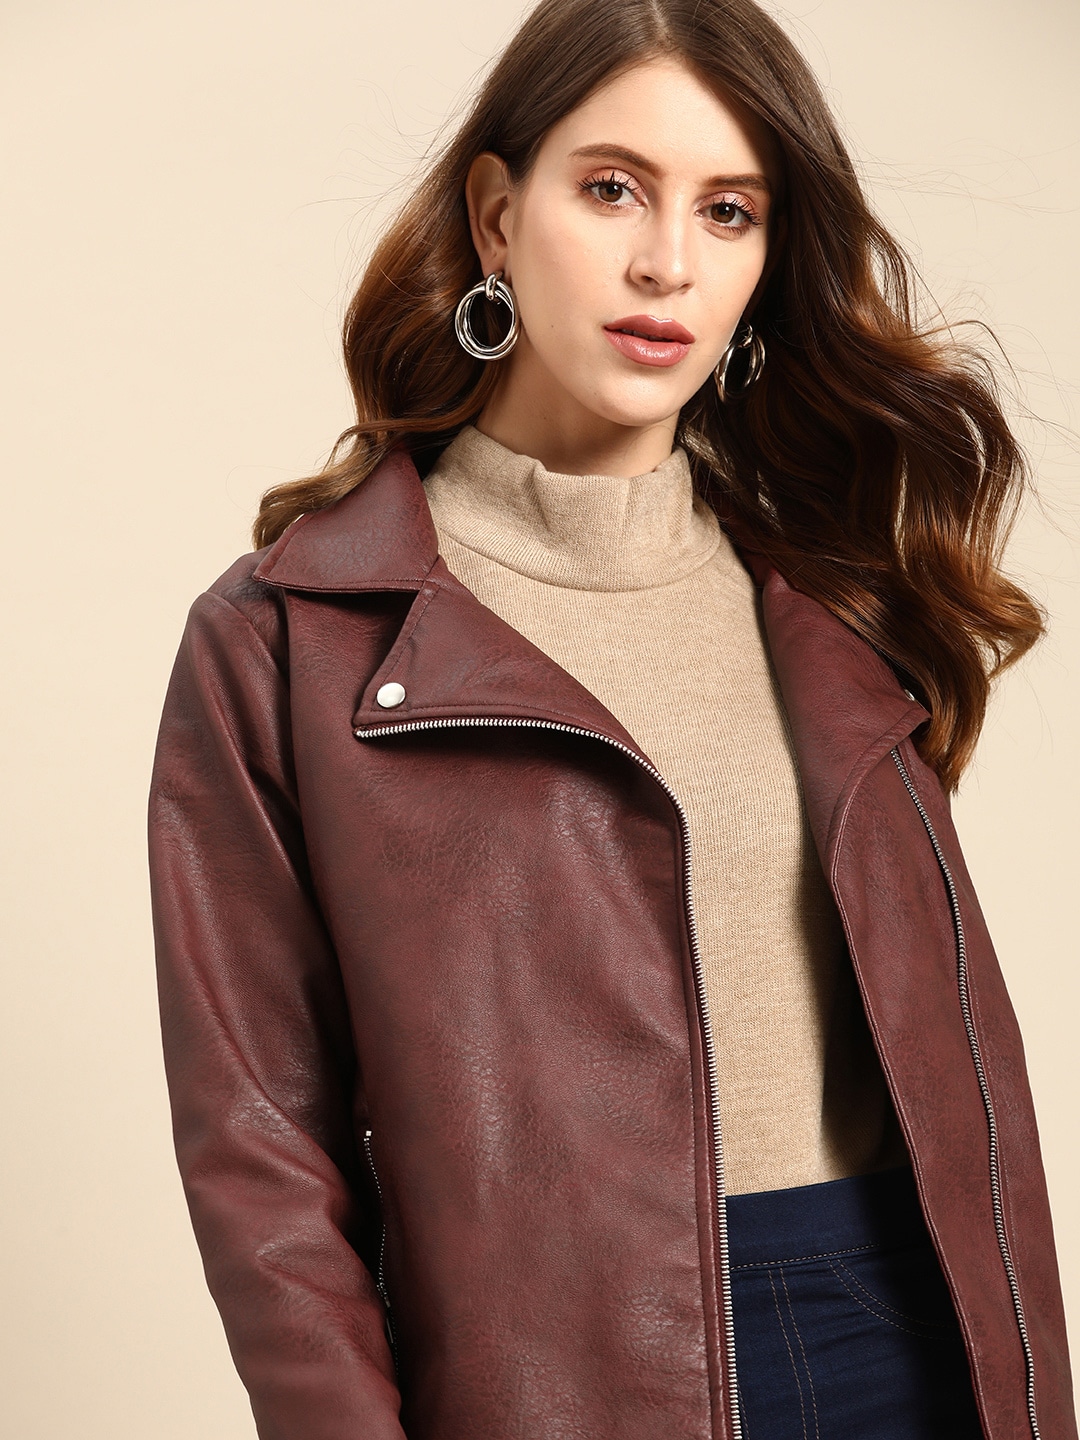 all about you Women Deep Burgundy Solid Biker Jacket Price in India